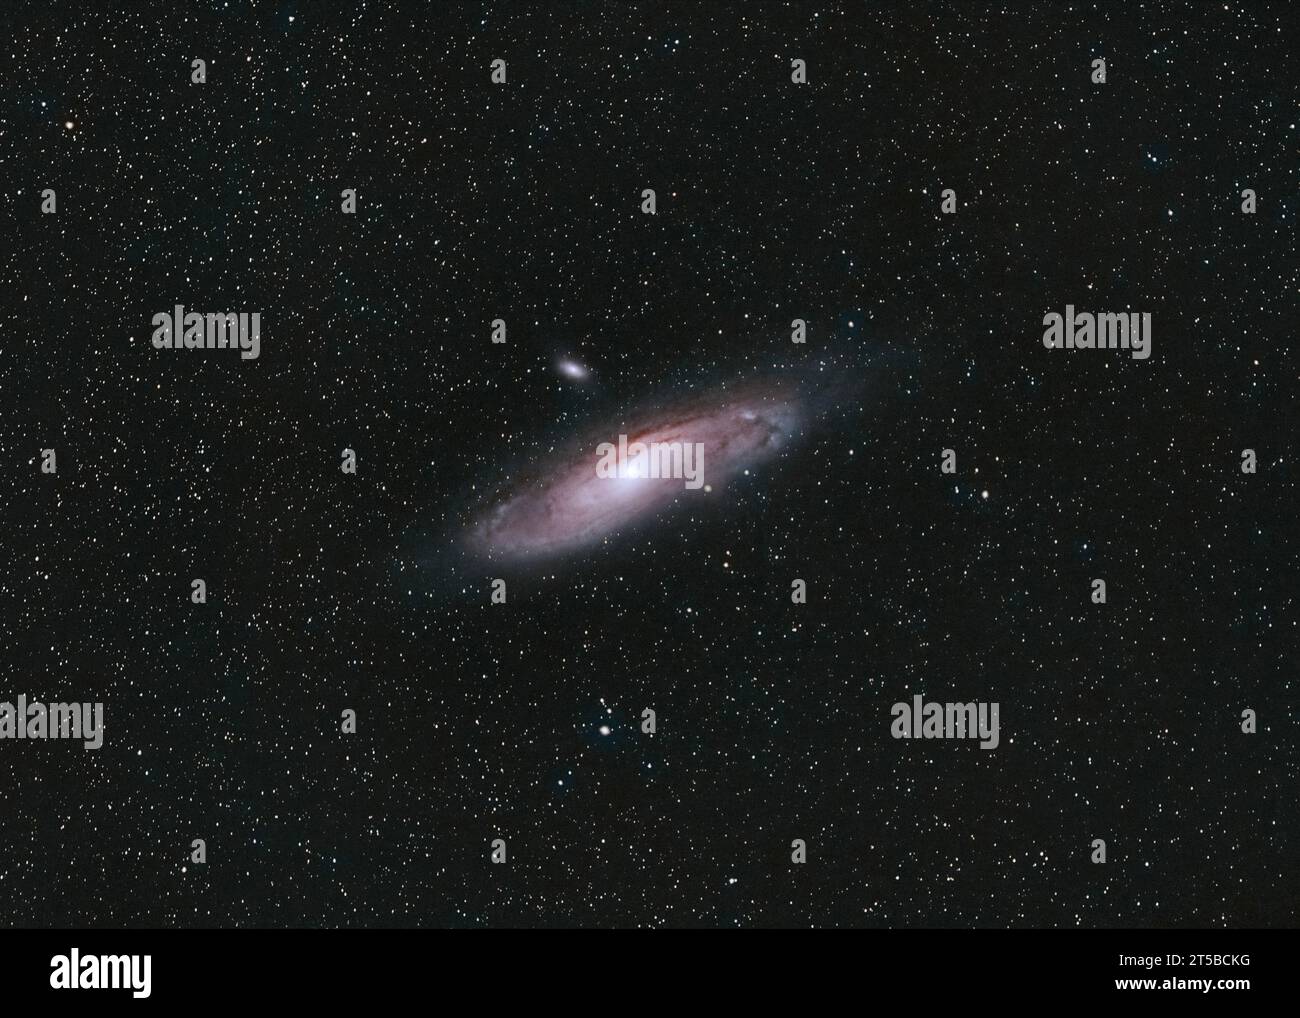 Andromeda Galaxy - spiral galaxy in the constellation of Andromeda (Messier 31) (M31) imaged through a mirrorless camera lens shot at 200mm, our neigh Stock Photo